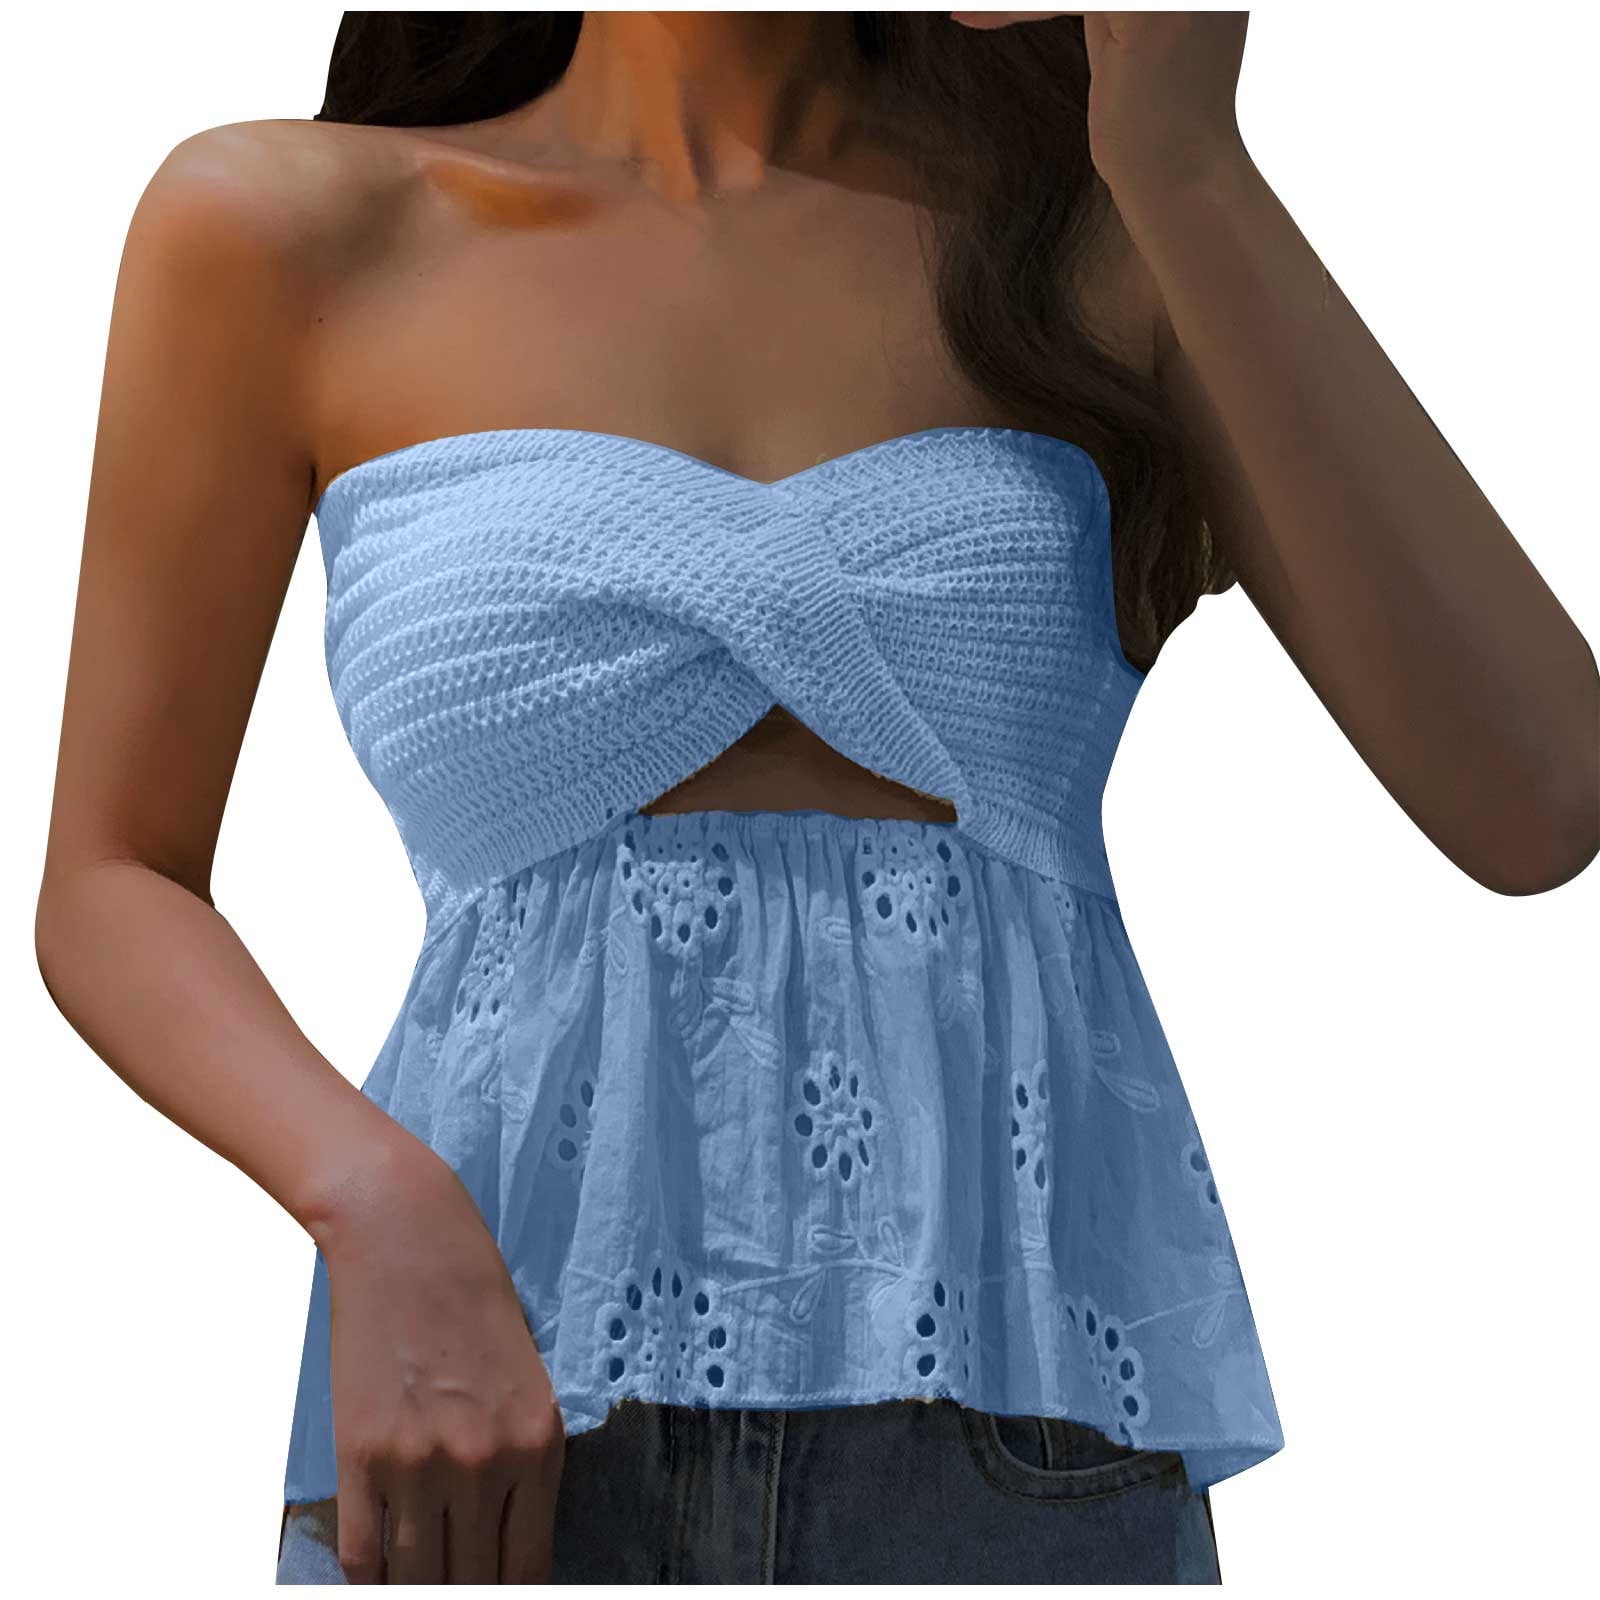 JUMP tube TOP camisole BLUE BOUCLE strapless BUILT IN BRA retail $58 M NWT